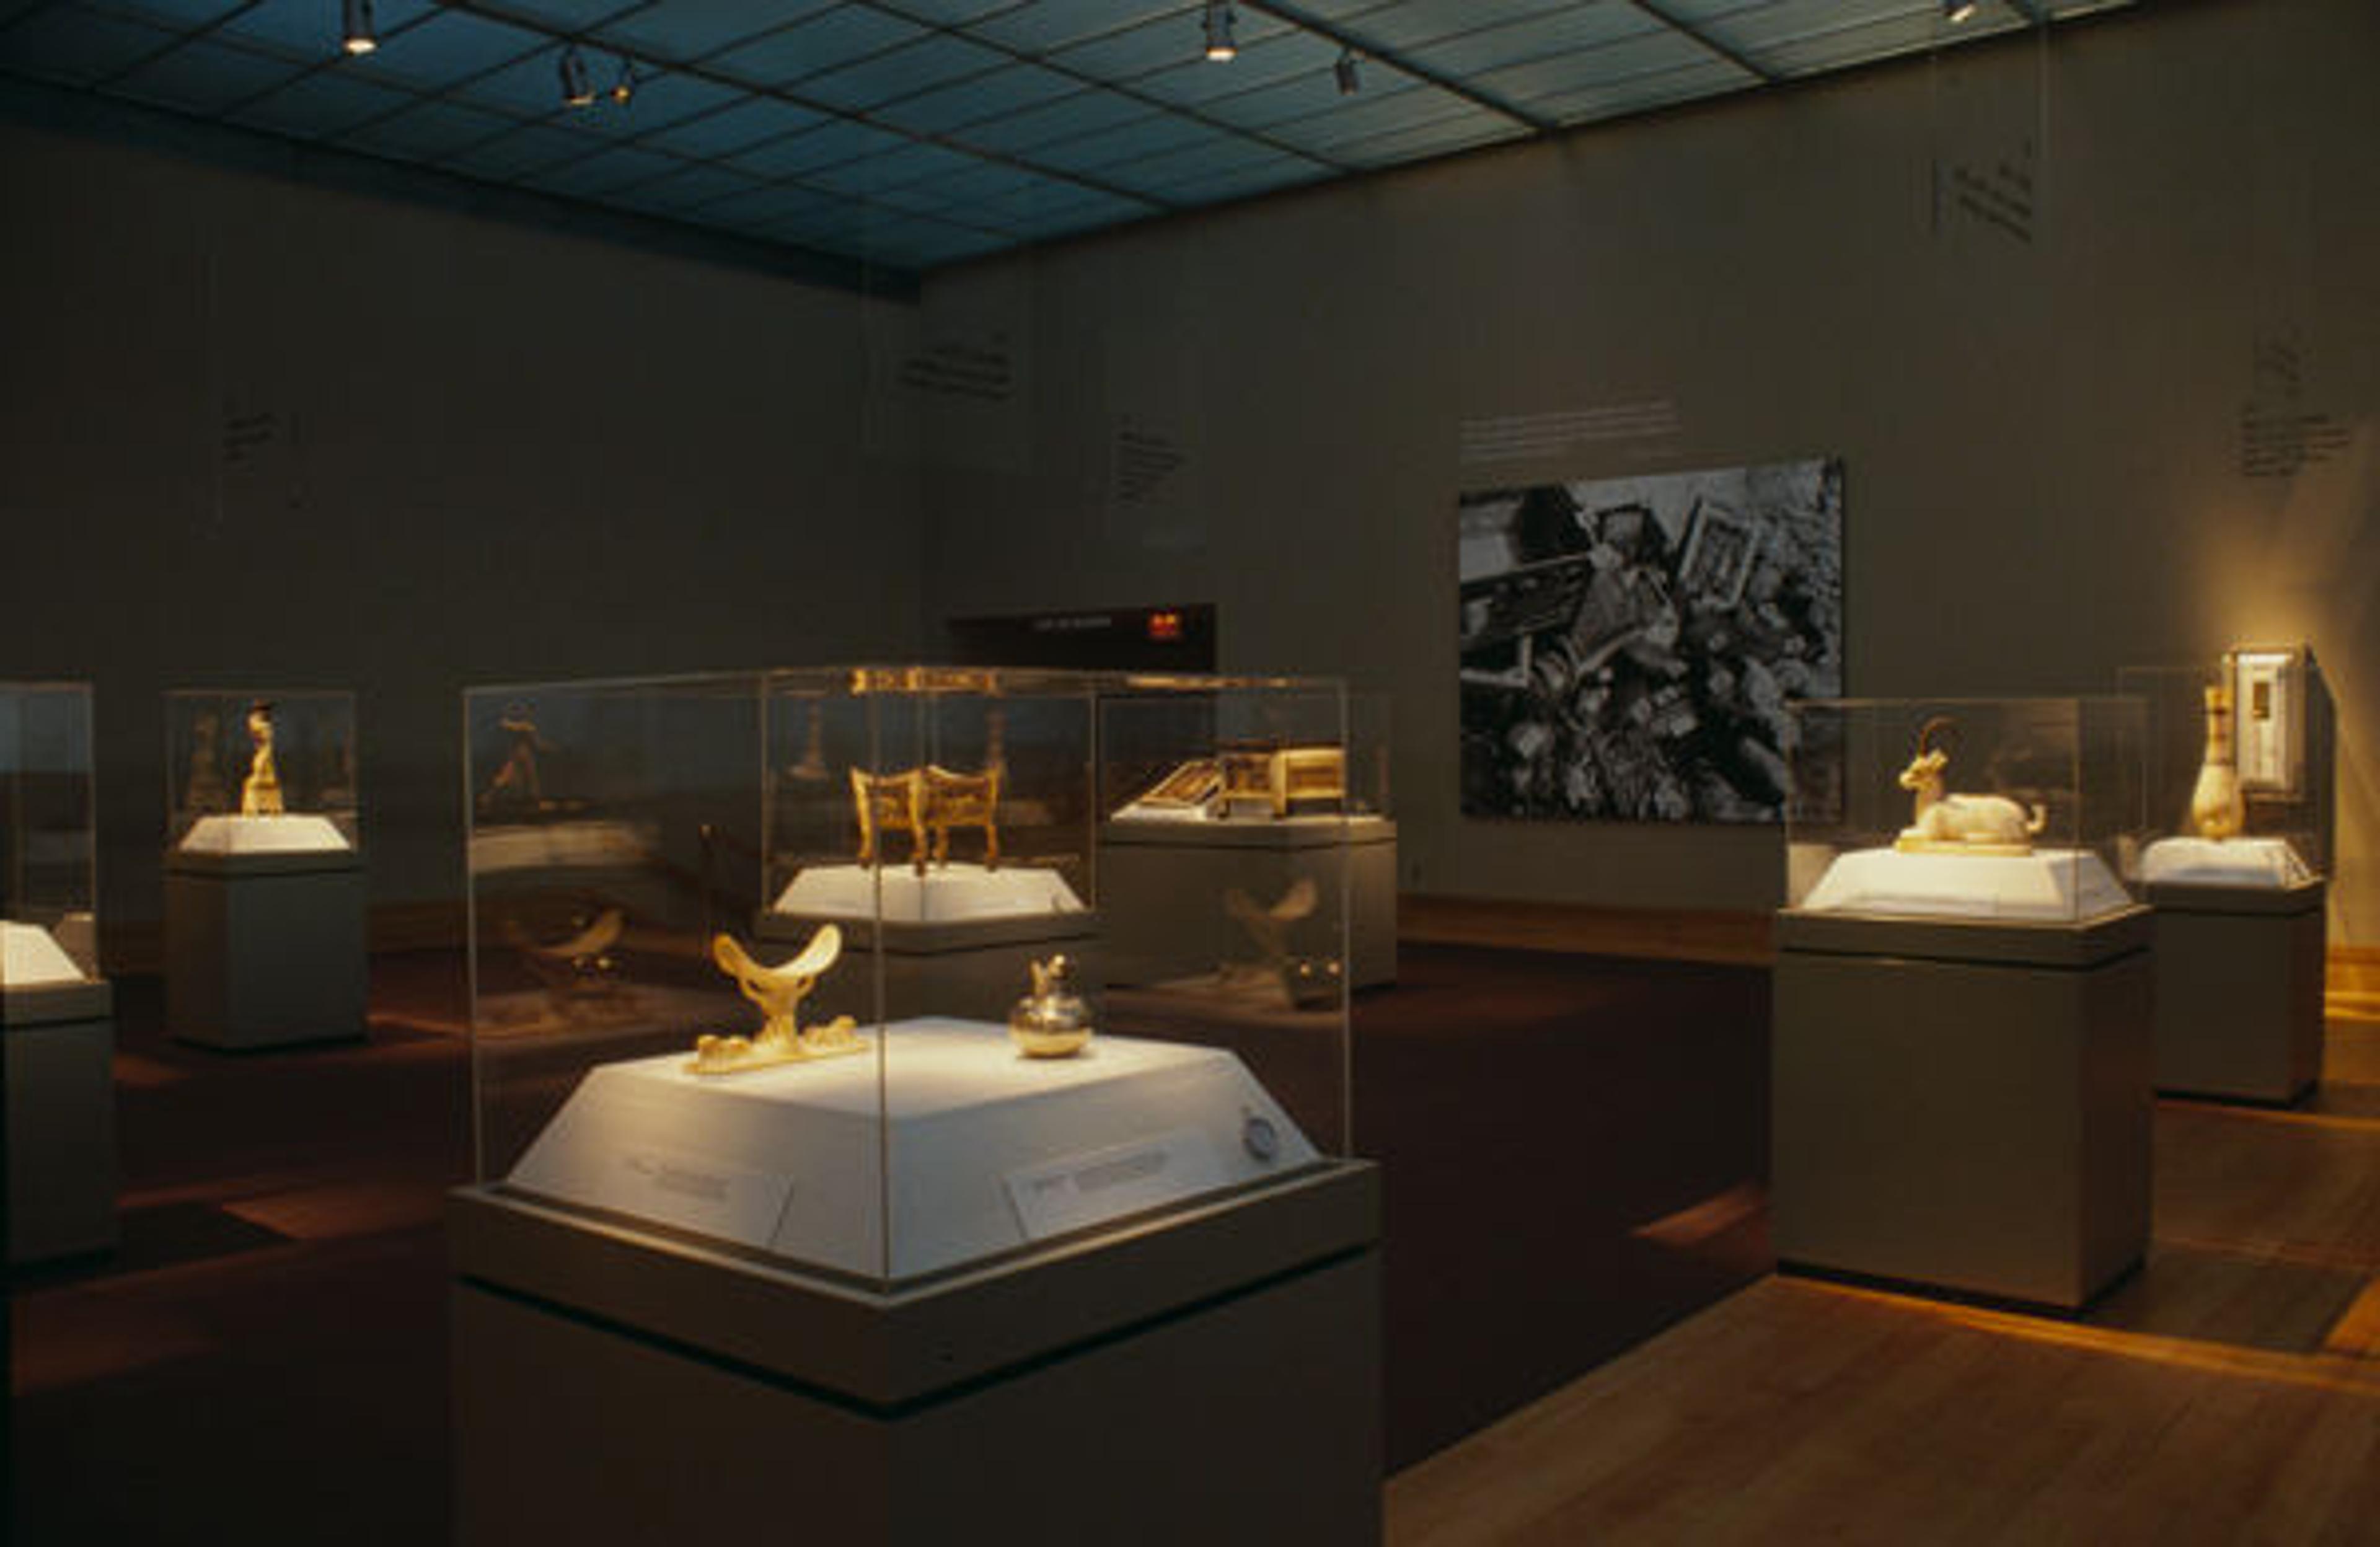 Gallery view of the exhibition Treasures of Tutankhamun. Photo by Al Mozell. © The Metropolitan Museum of Art